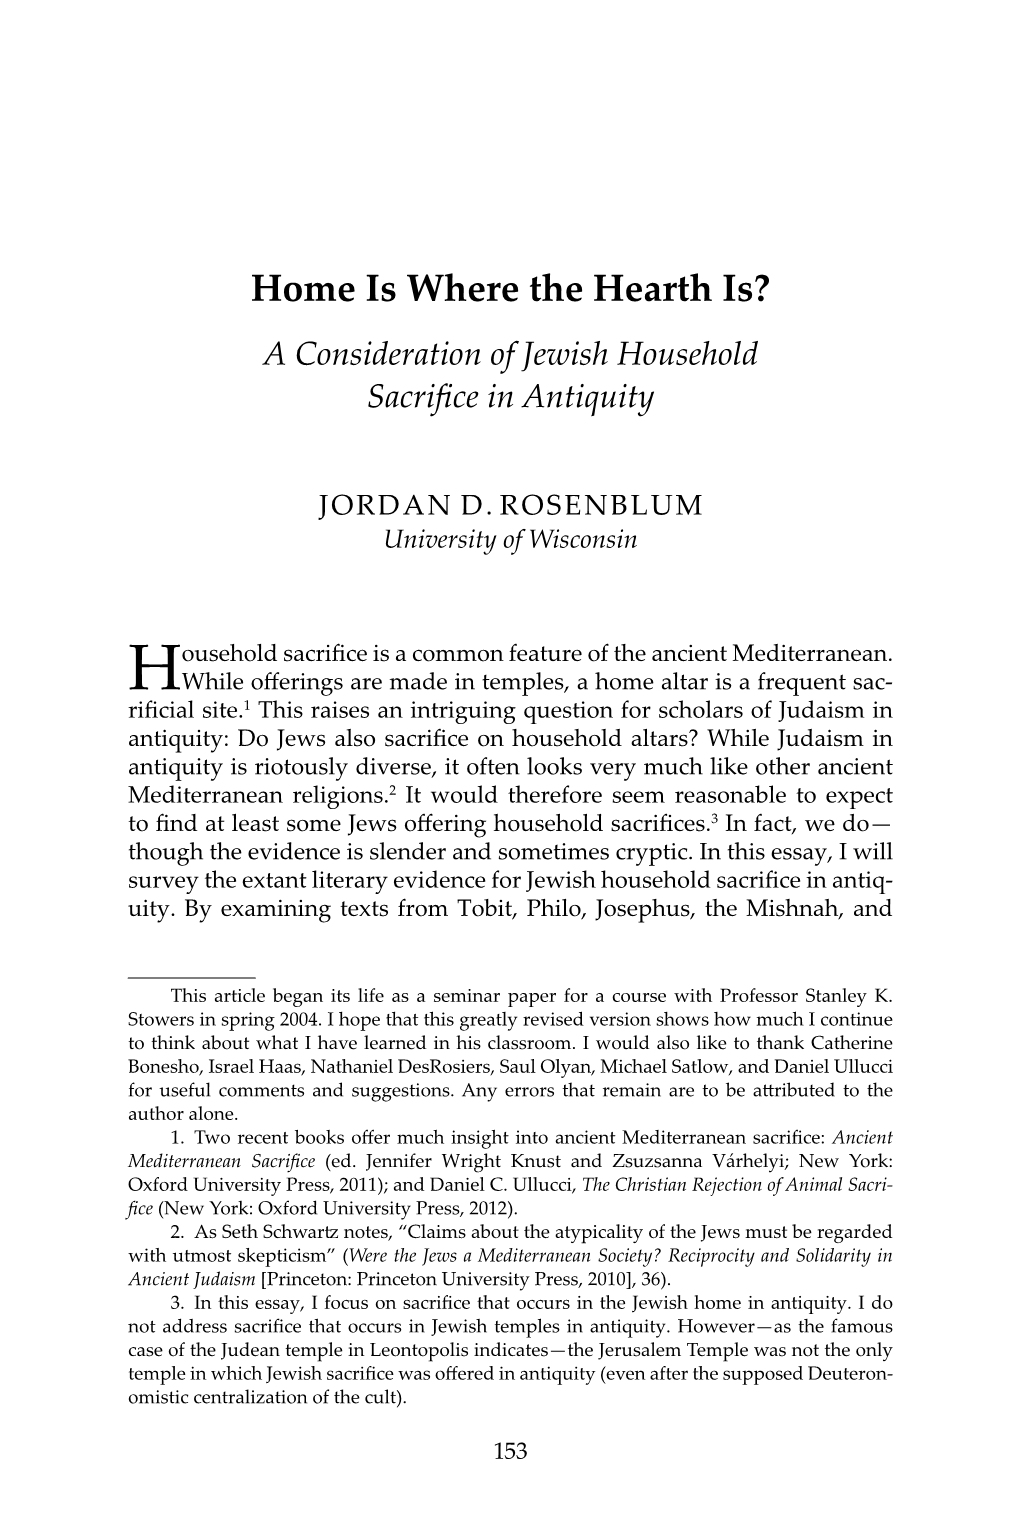 Home Is Where the Hearth Is? a Consideration of Jewish Household Sacrifice in Antiquity